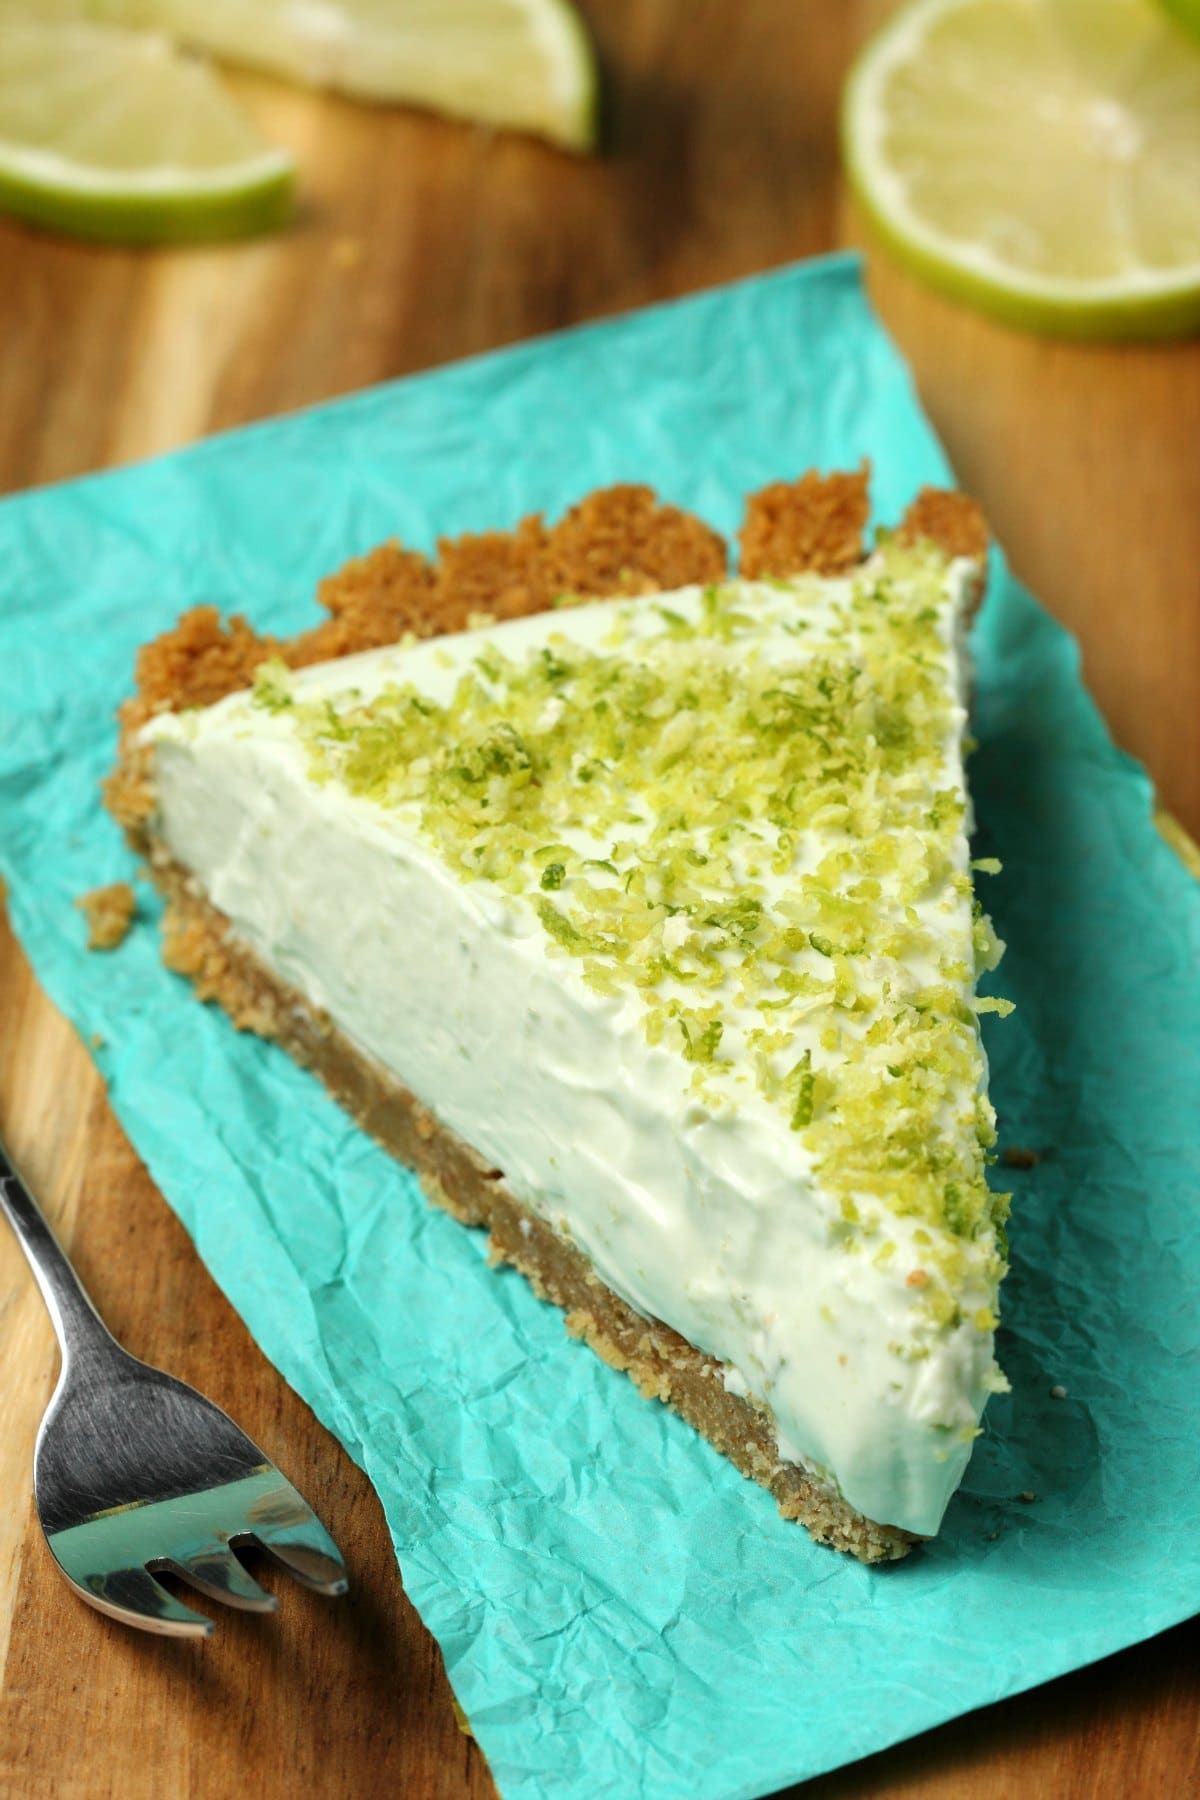 Creamy dreamy vegan key lime pie! This deliciously lime flavored pie ...